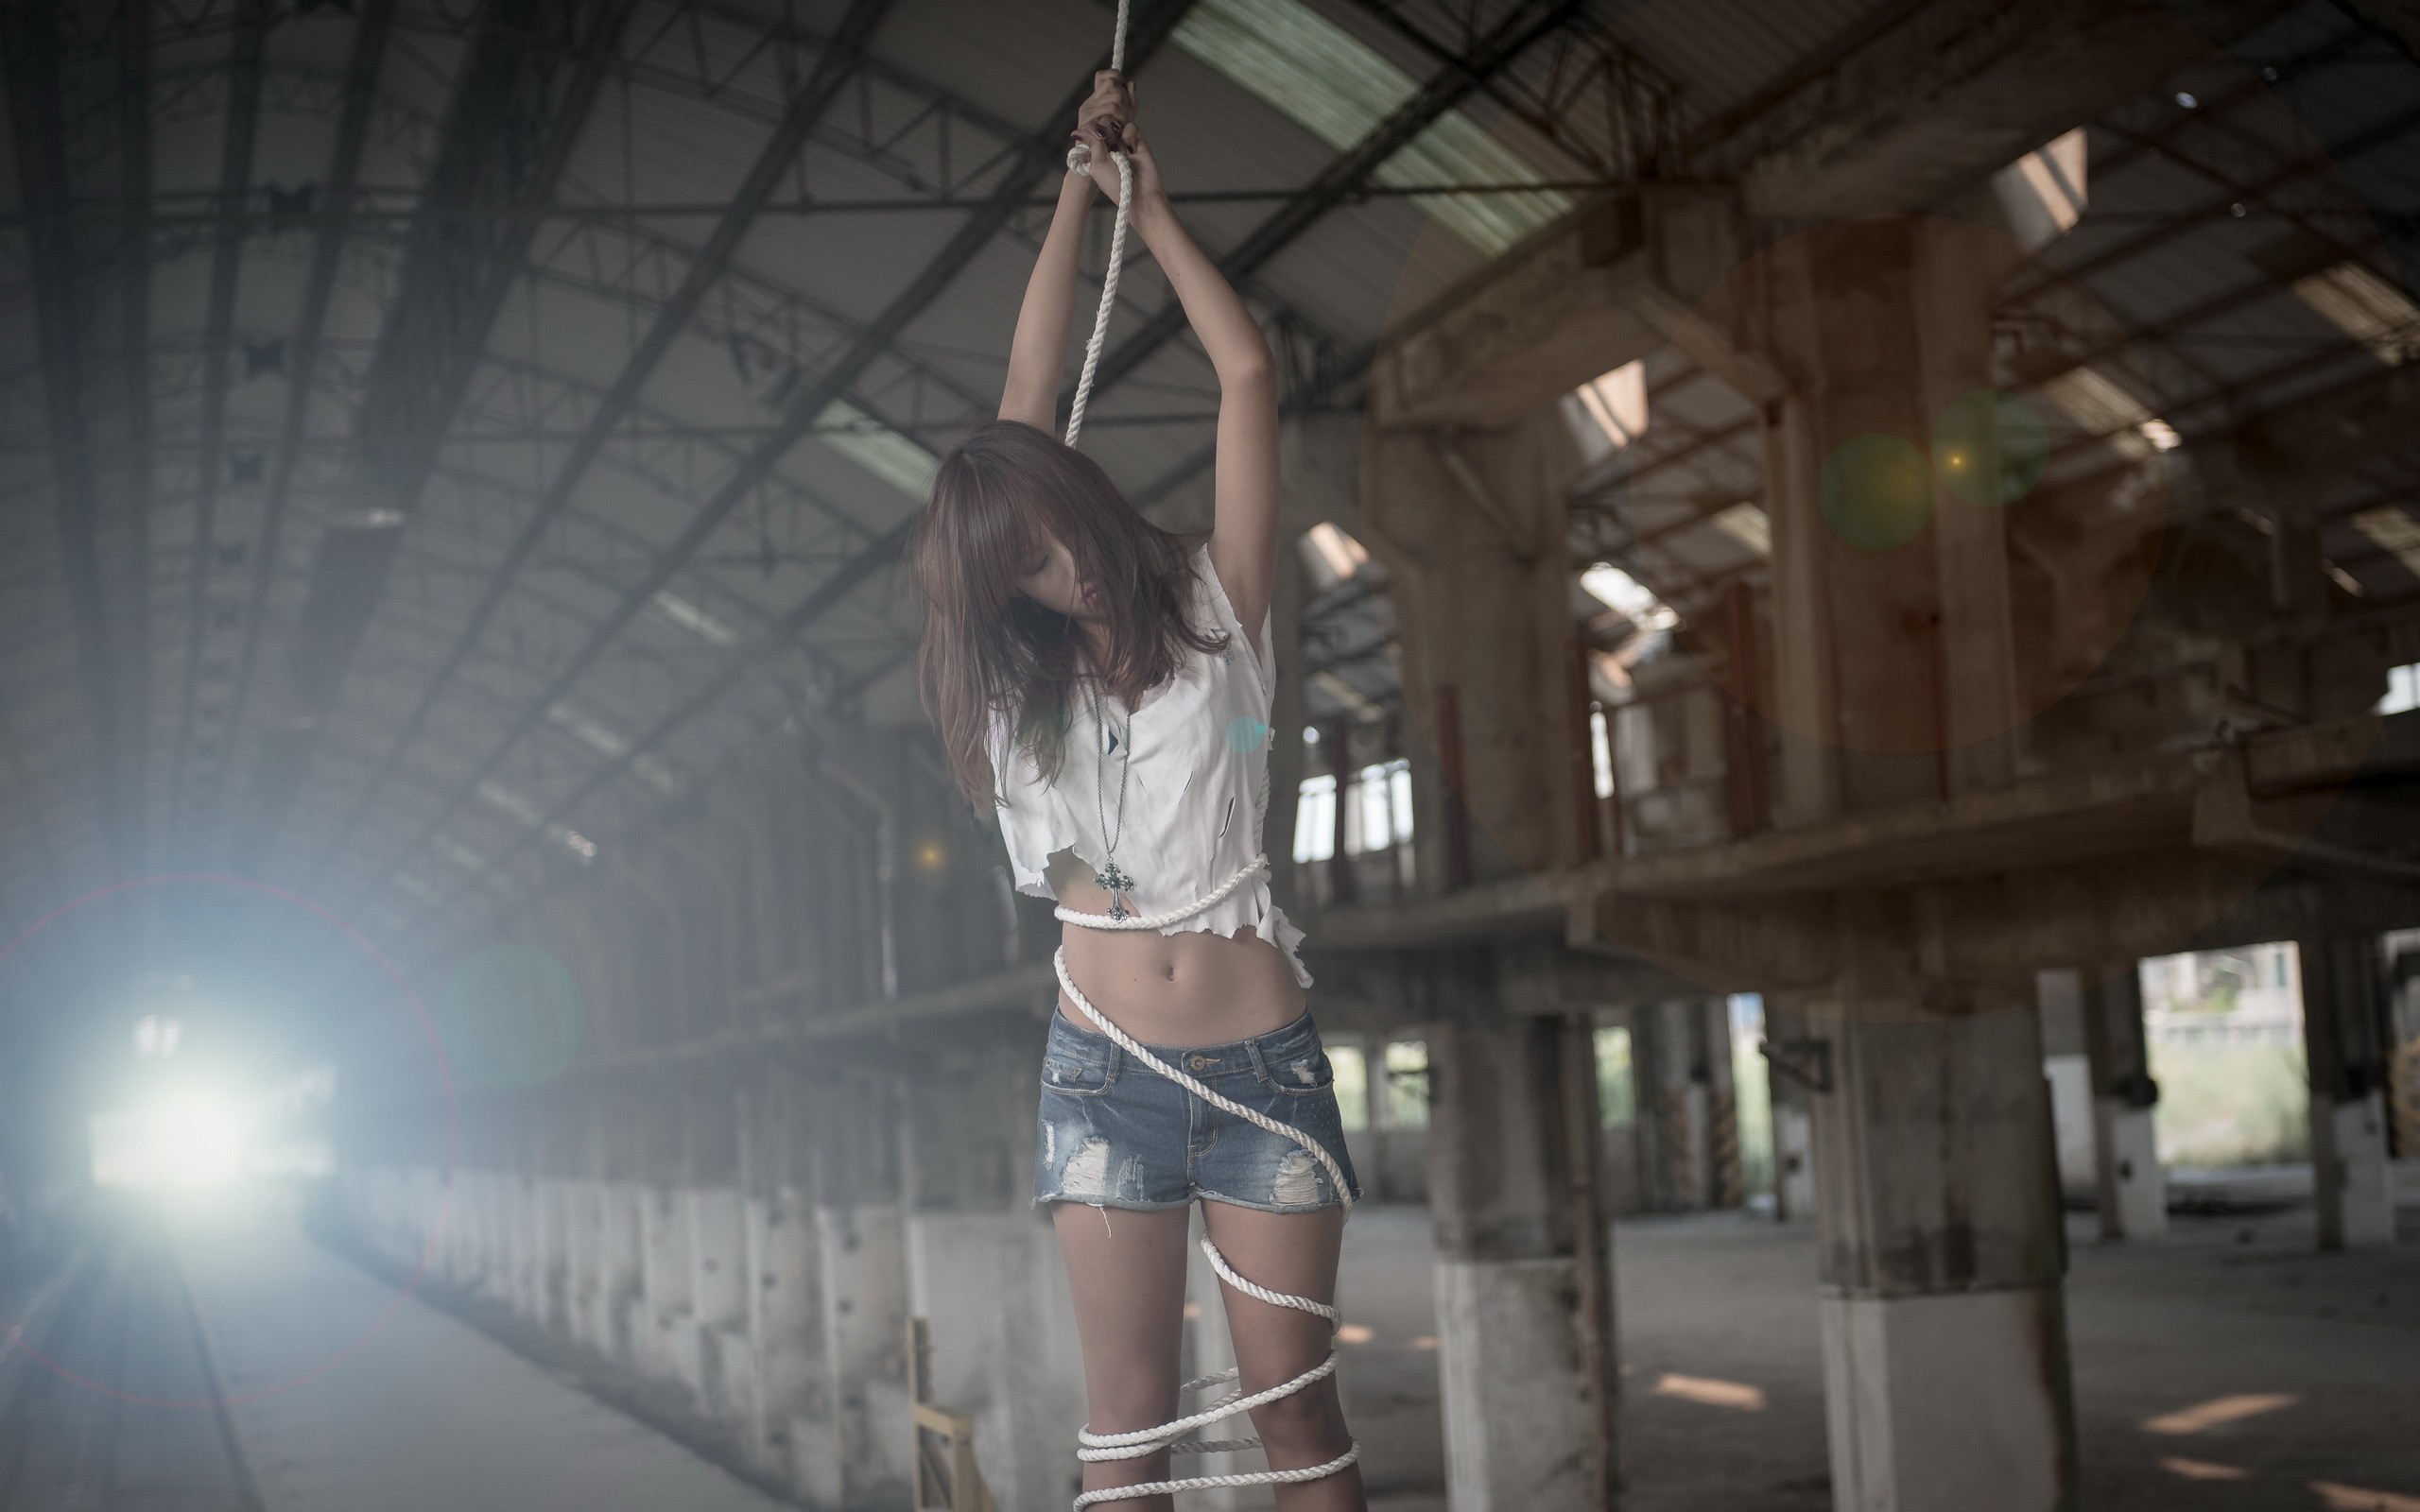 Asian Ropes Bound Girl Wallpaper 181928 2560x1600px On Wallls Com